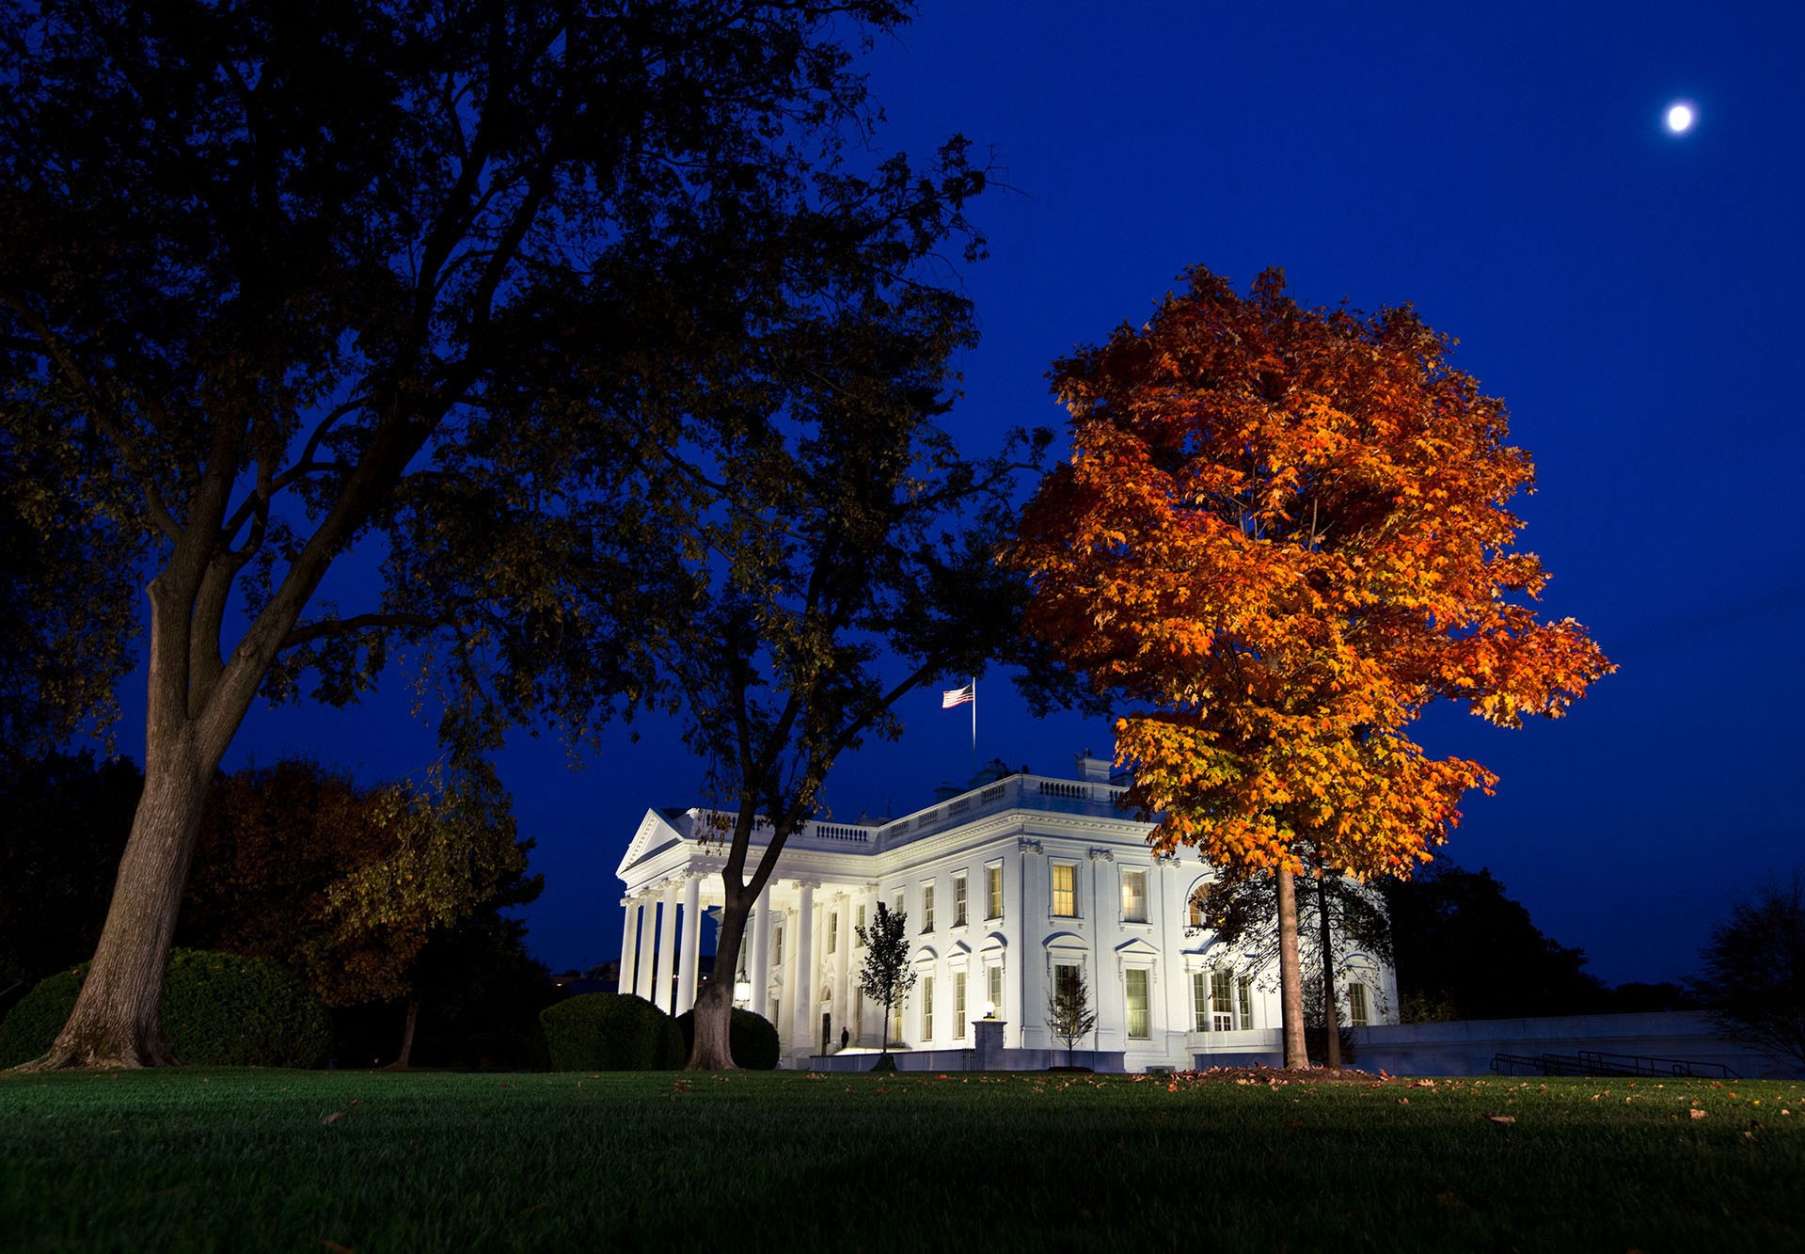 Nov. 8, 2016
“Perfect light balance as Chuck Kennedy made this exquisite picture of the North Portico of the White House and fall foliage as the foreground was lit by television lighting.” (Official White House Photo by Chuck Kennedy)